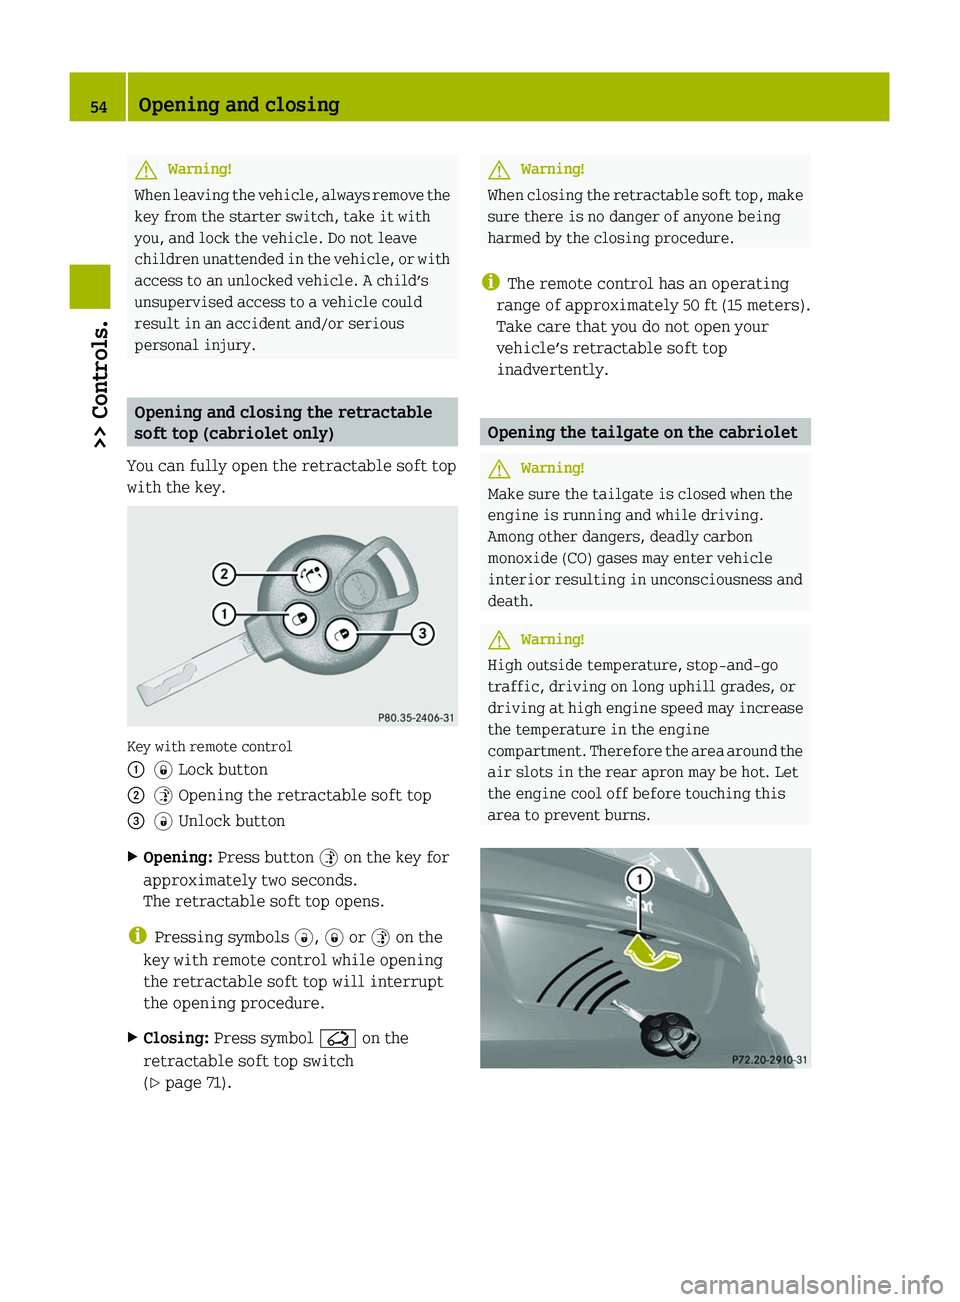 SMART FORTWO COUPE 2010  Owners Manual GWarning!
When leaving the vehicle, always remove the
key from the starter switch, take it with
you, and lock the vehicle. Do not leave
children unattended in the vehicle, or with
access to an unlocke